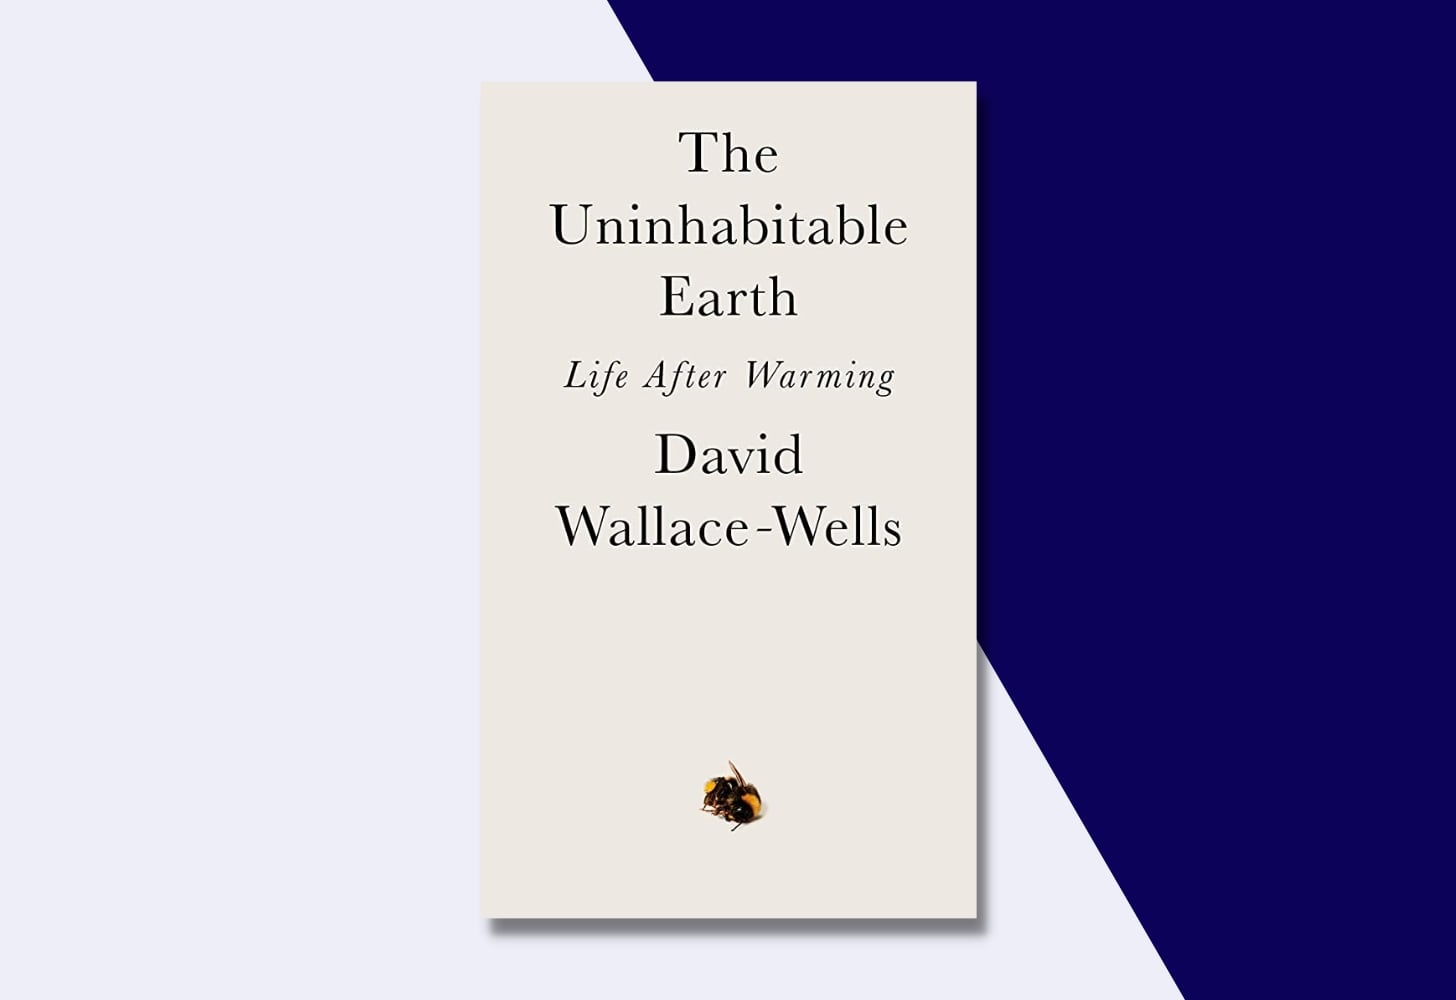 “The Uninhabitable Earth: Life After Warming” by David Wallace-Wells